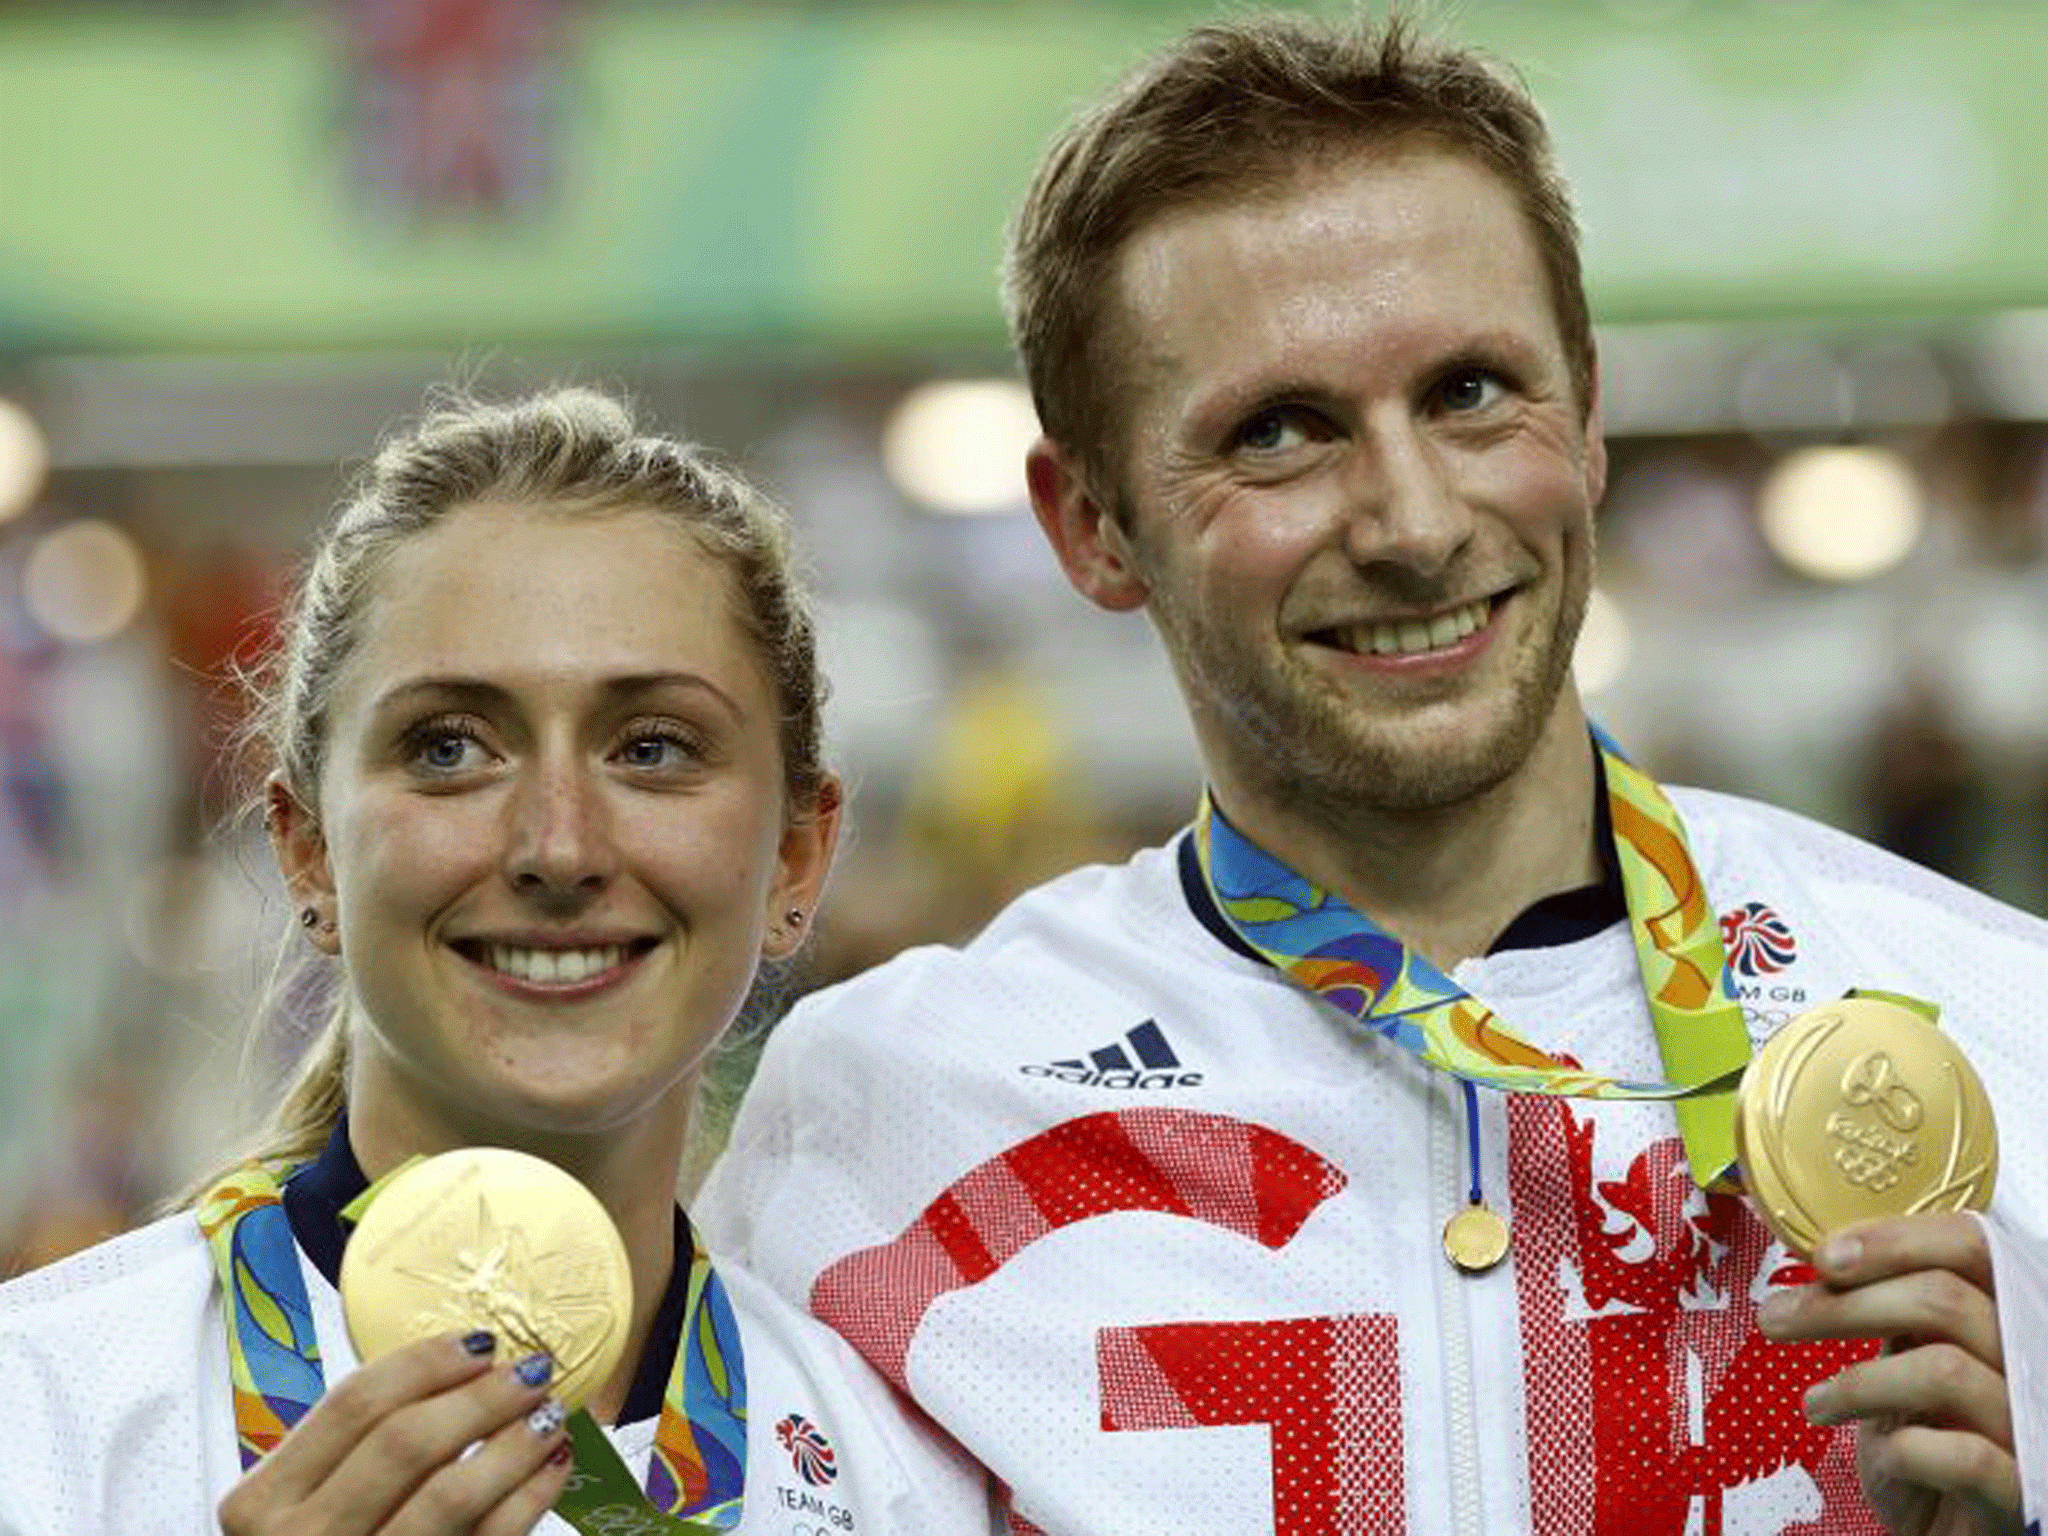 Laura Trott and her fiancé Jason Kenny, whose gold medals each cost approximately £5.5m in public money to achieve